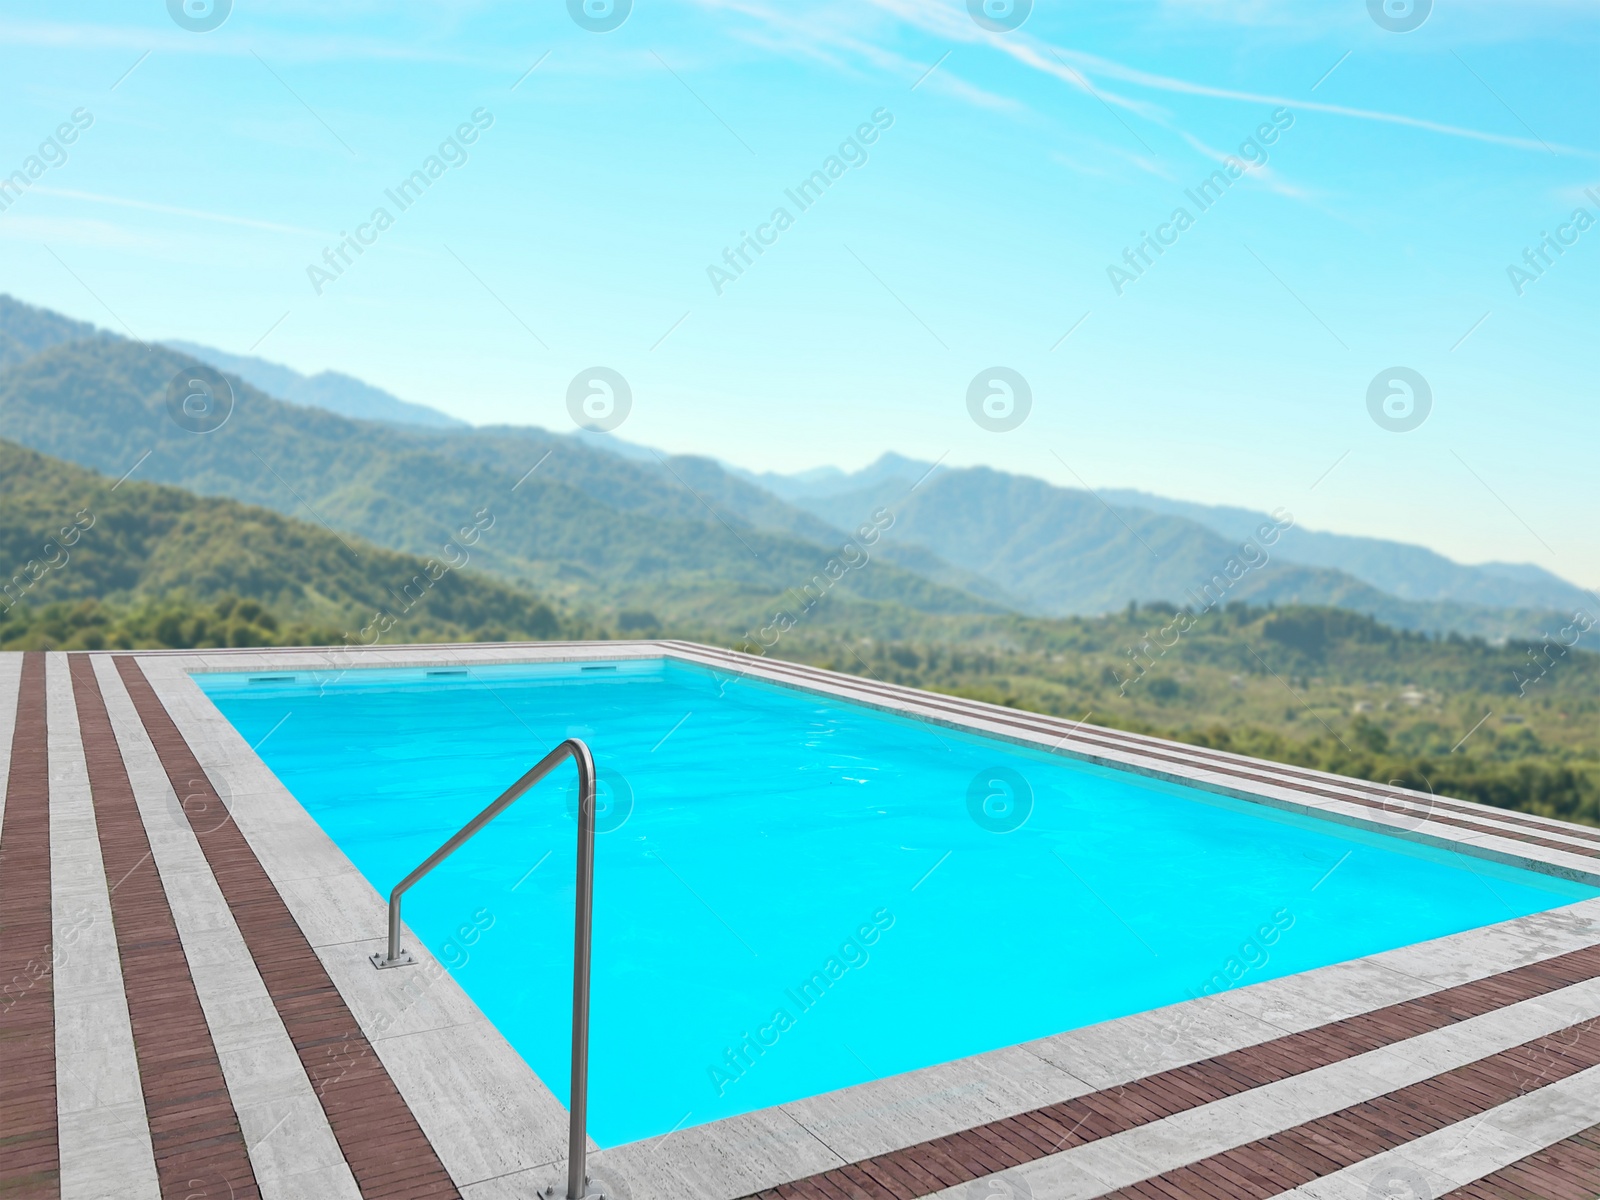 Image of Outdoor swimming pool at luxury resort with beautiful view of mountains on sunny day